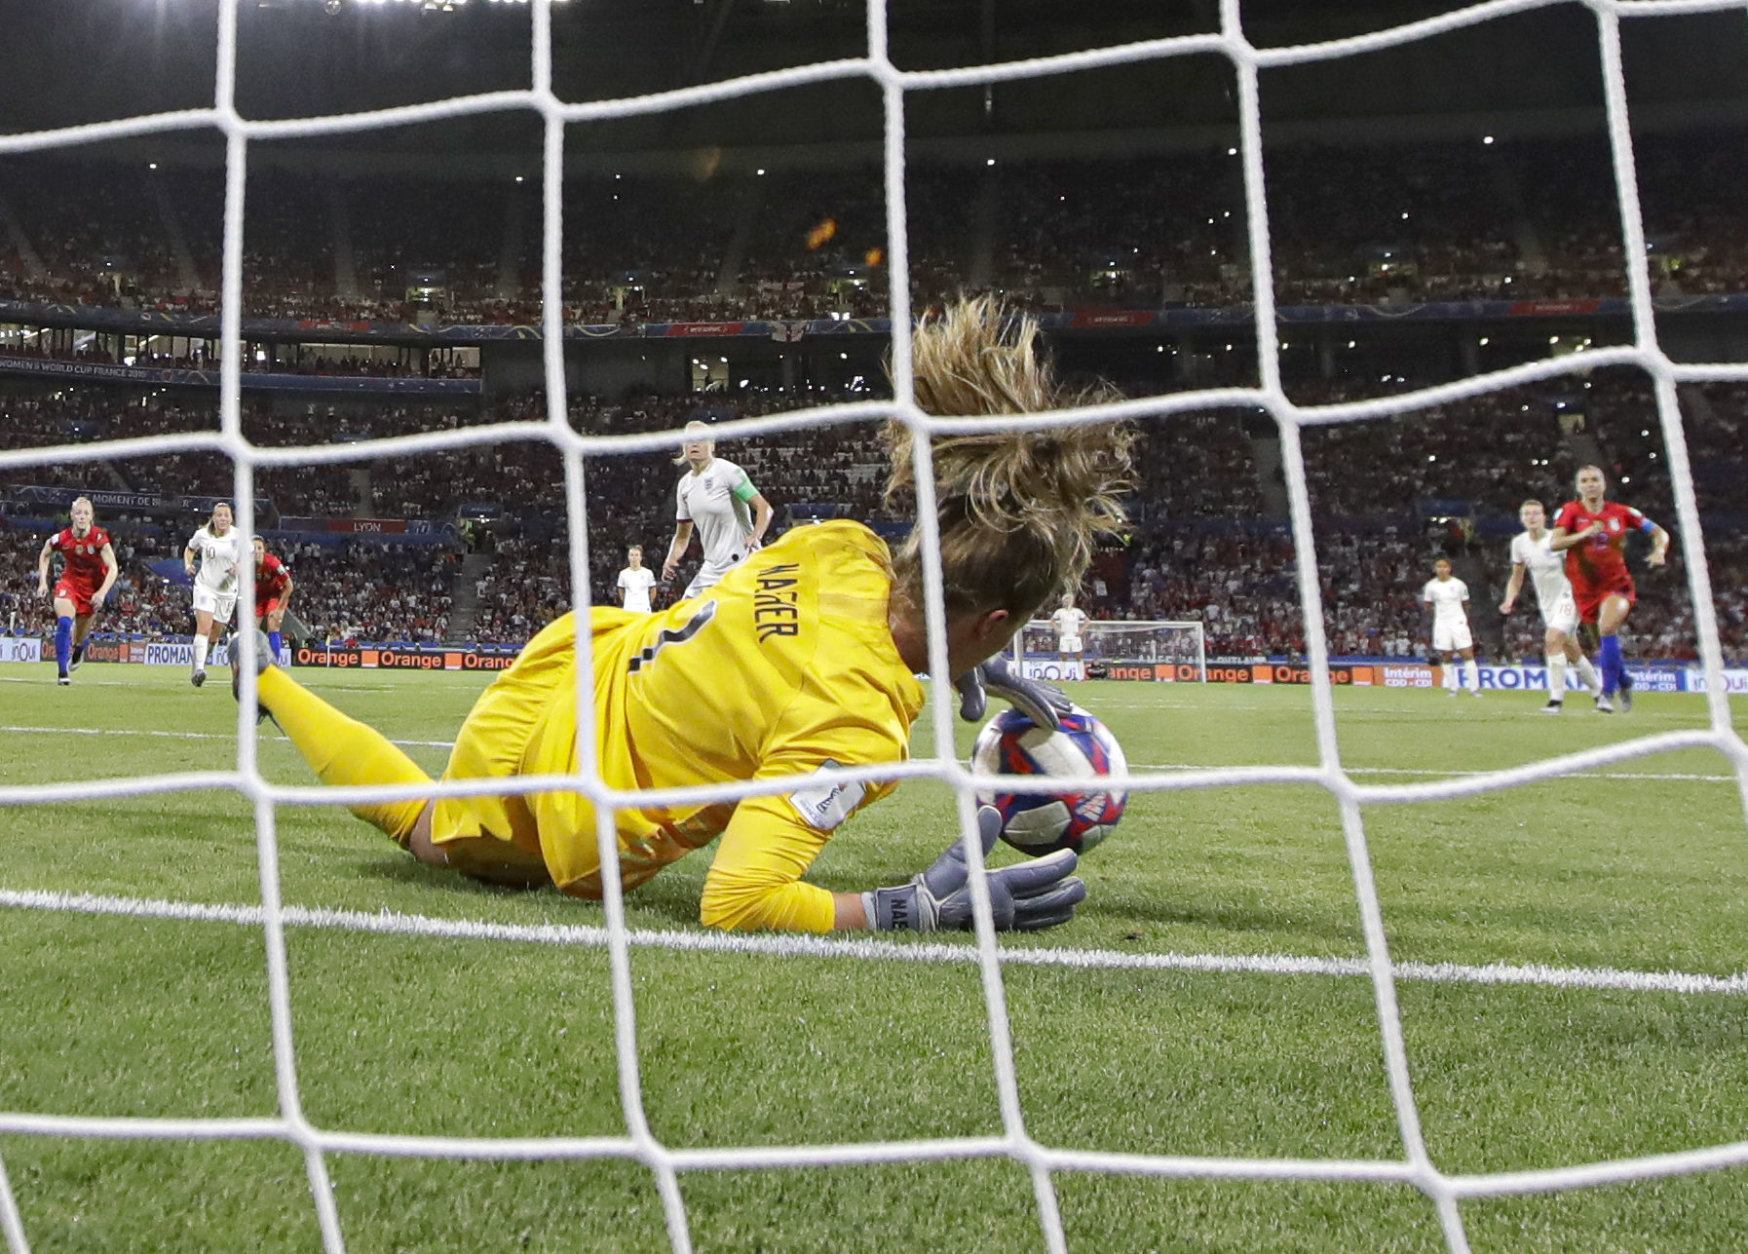 United States goalkeeper Alyssa Naeher saves a penalty shot taken by England's Steph Houghton during the Women's World Cup semifinal soccer match between England and the United States, at the Stade de Lyon, outside Lyon, France, Tuesday, July 2, 2019. (AP Photo/Alessandra Tarantino)